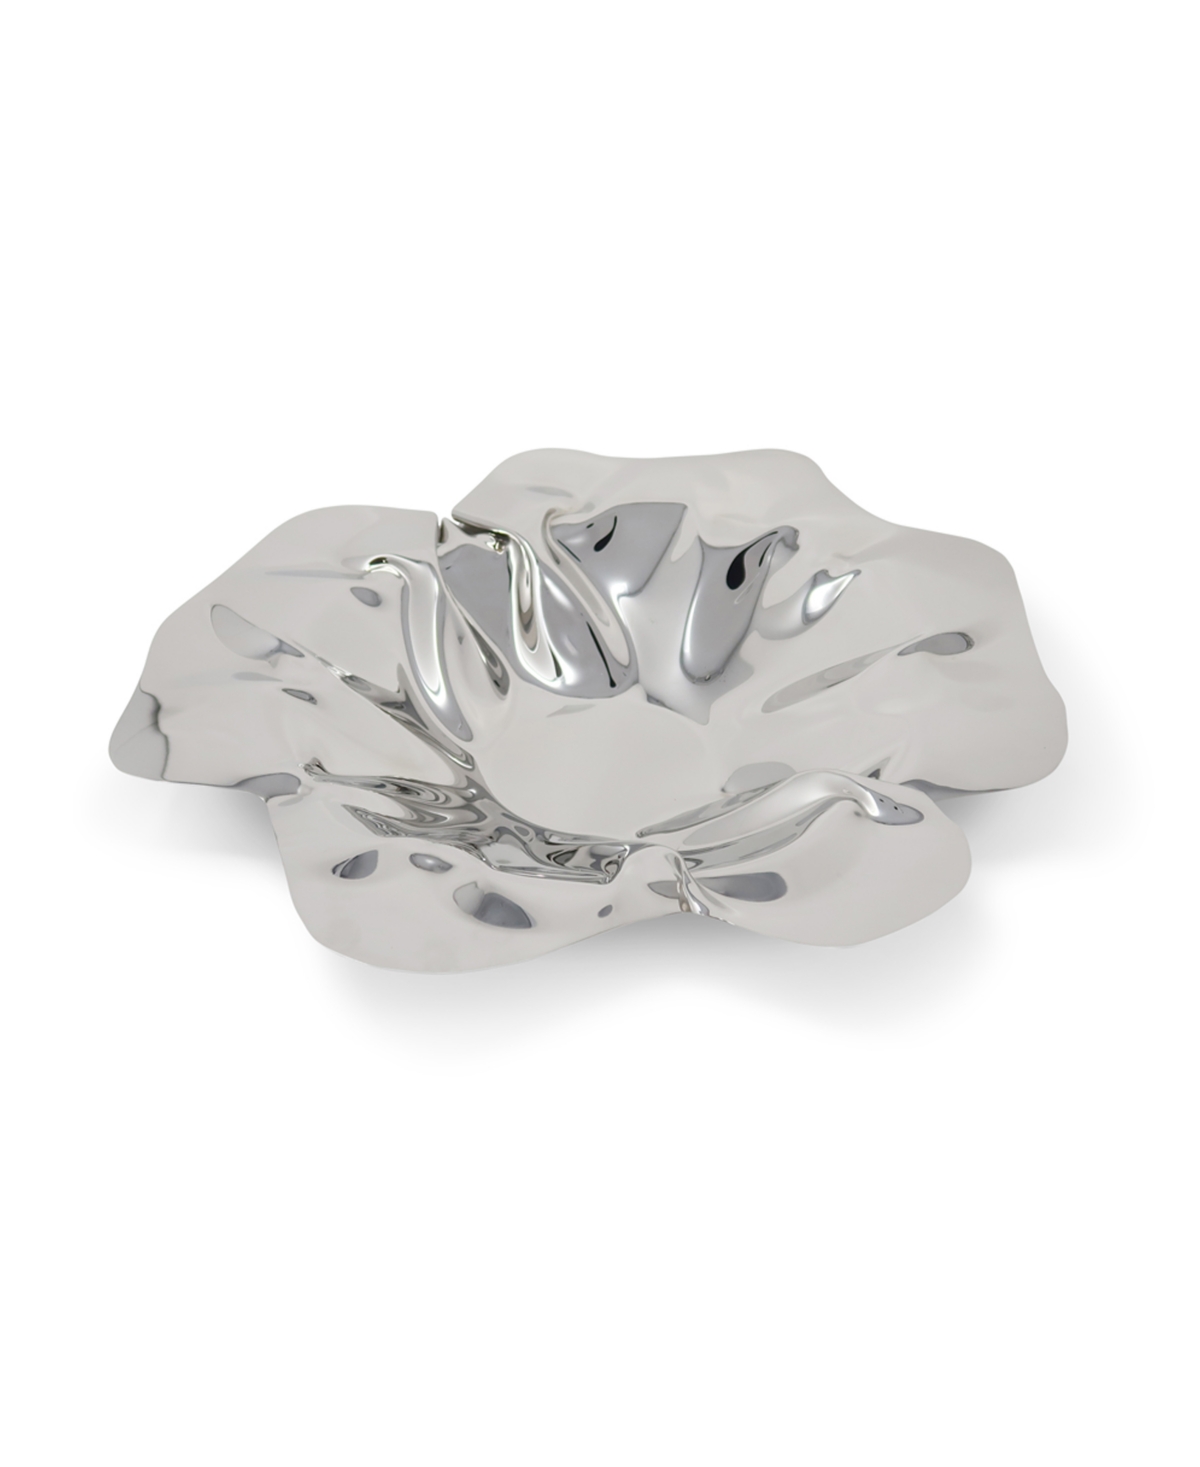 Stainless Steel Crumpled Bowl - Silver